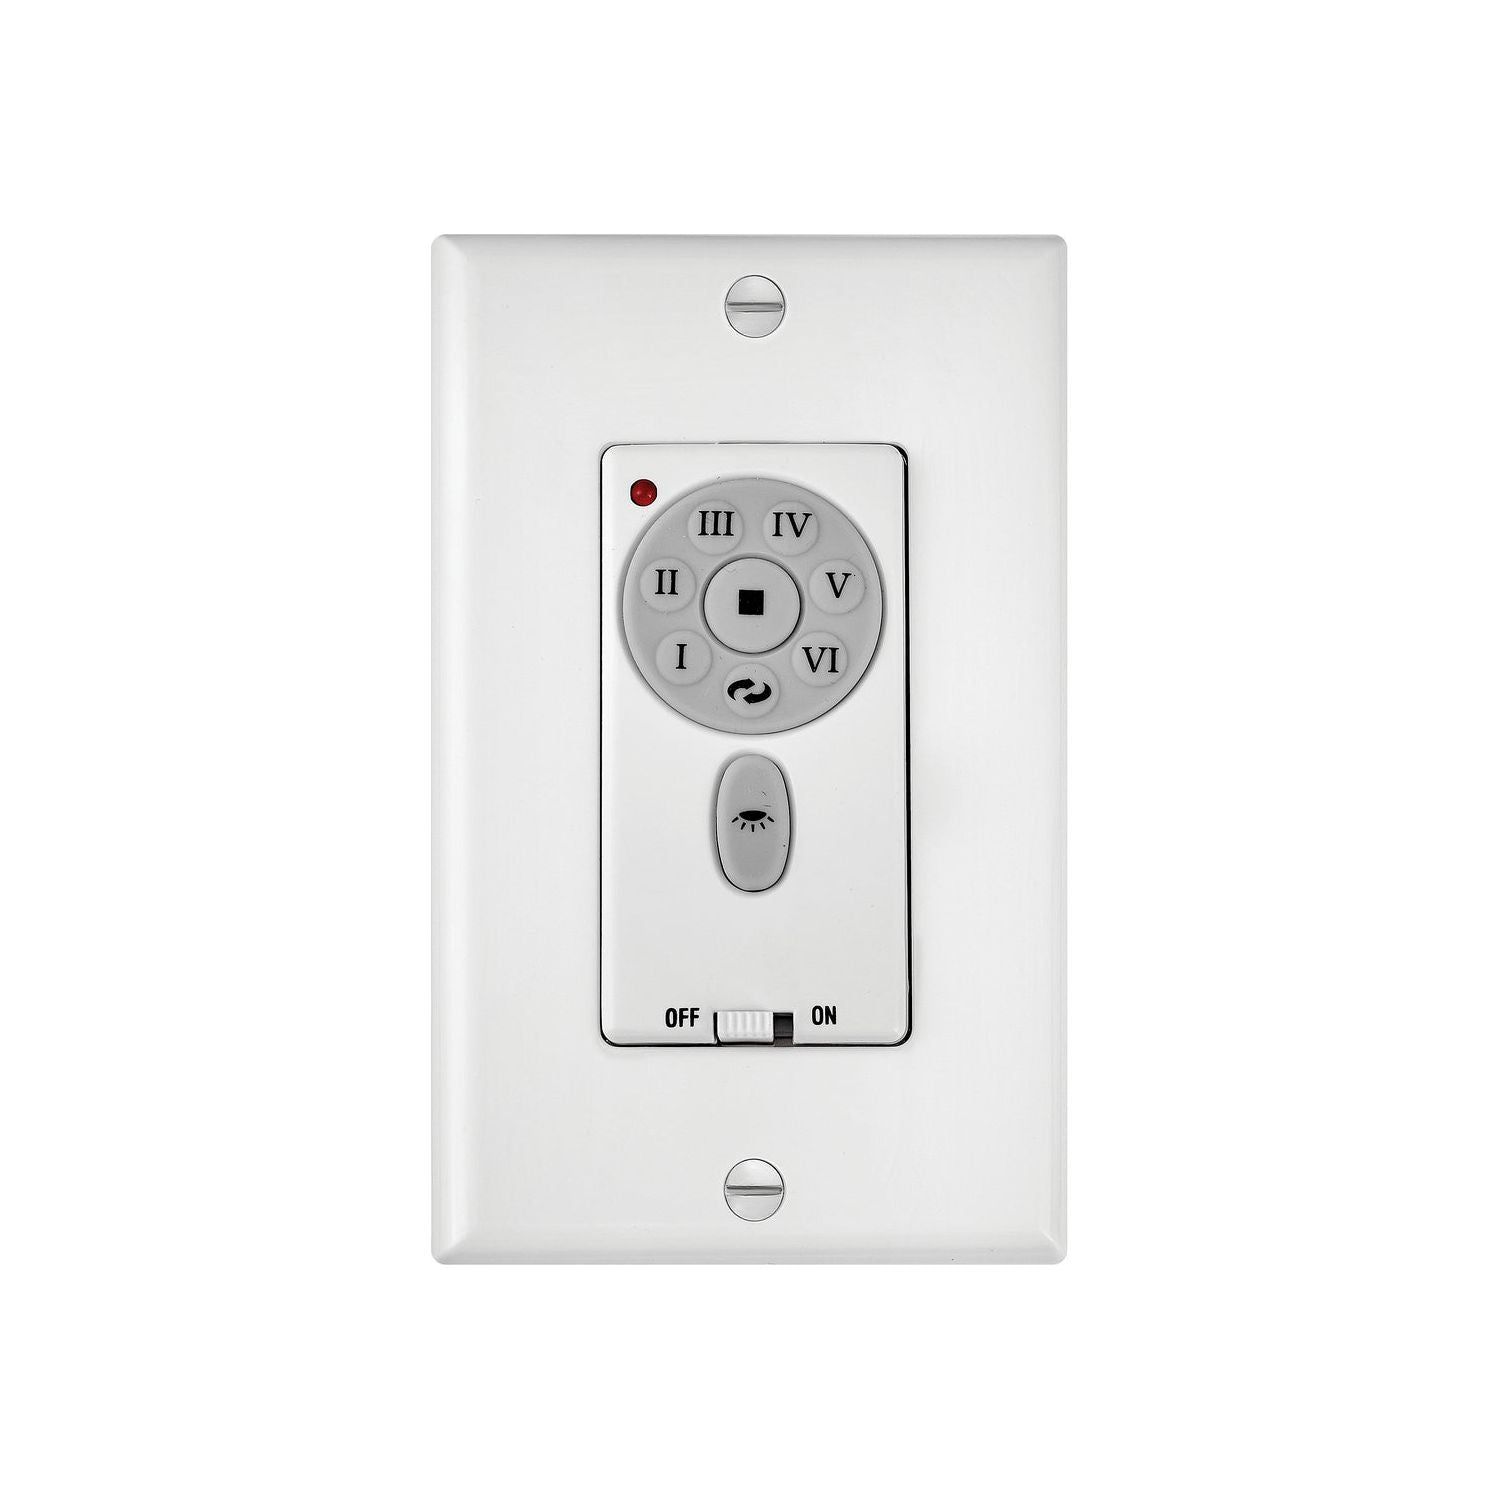 Hinkley Canada - 980013FAS - Wall Contol - Wall Control 6 Speed Dc - White